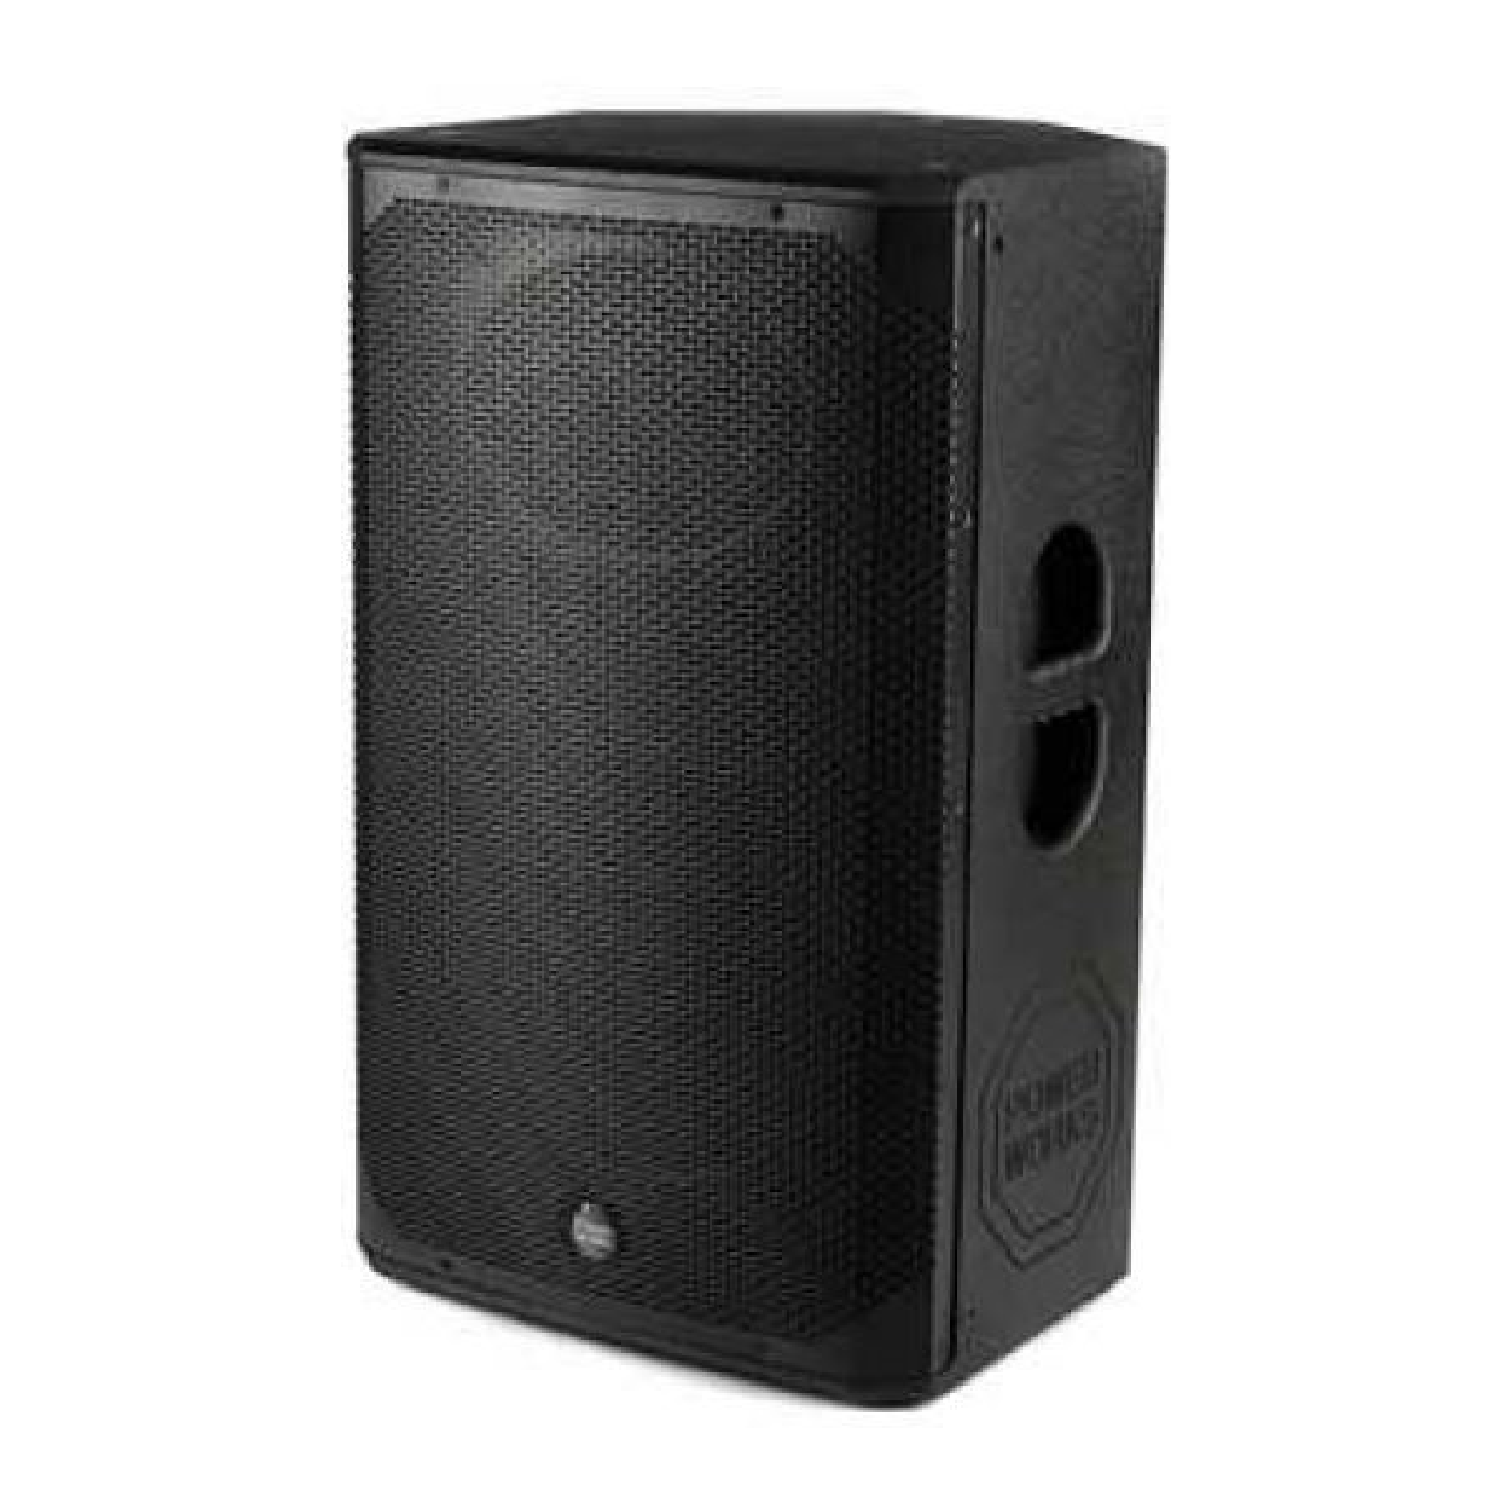 15 Inches 450 Watts 2 Way Active Speaker with DSP Technology Wood (1pc)   ARTEMIS 15PD power works